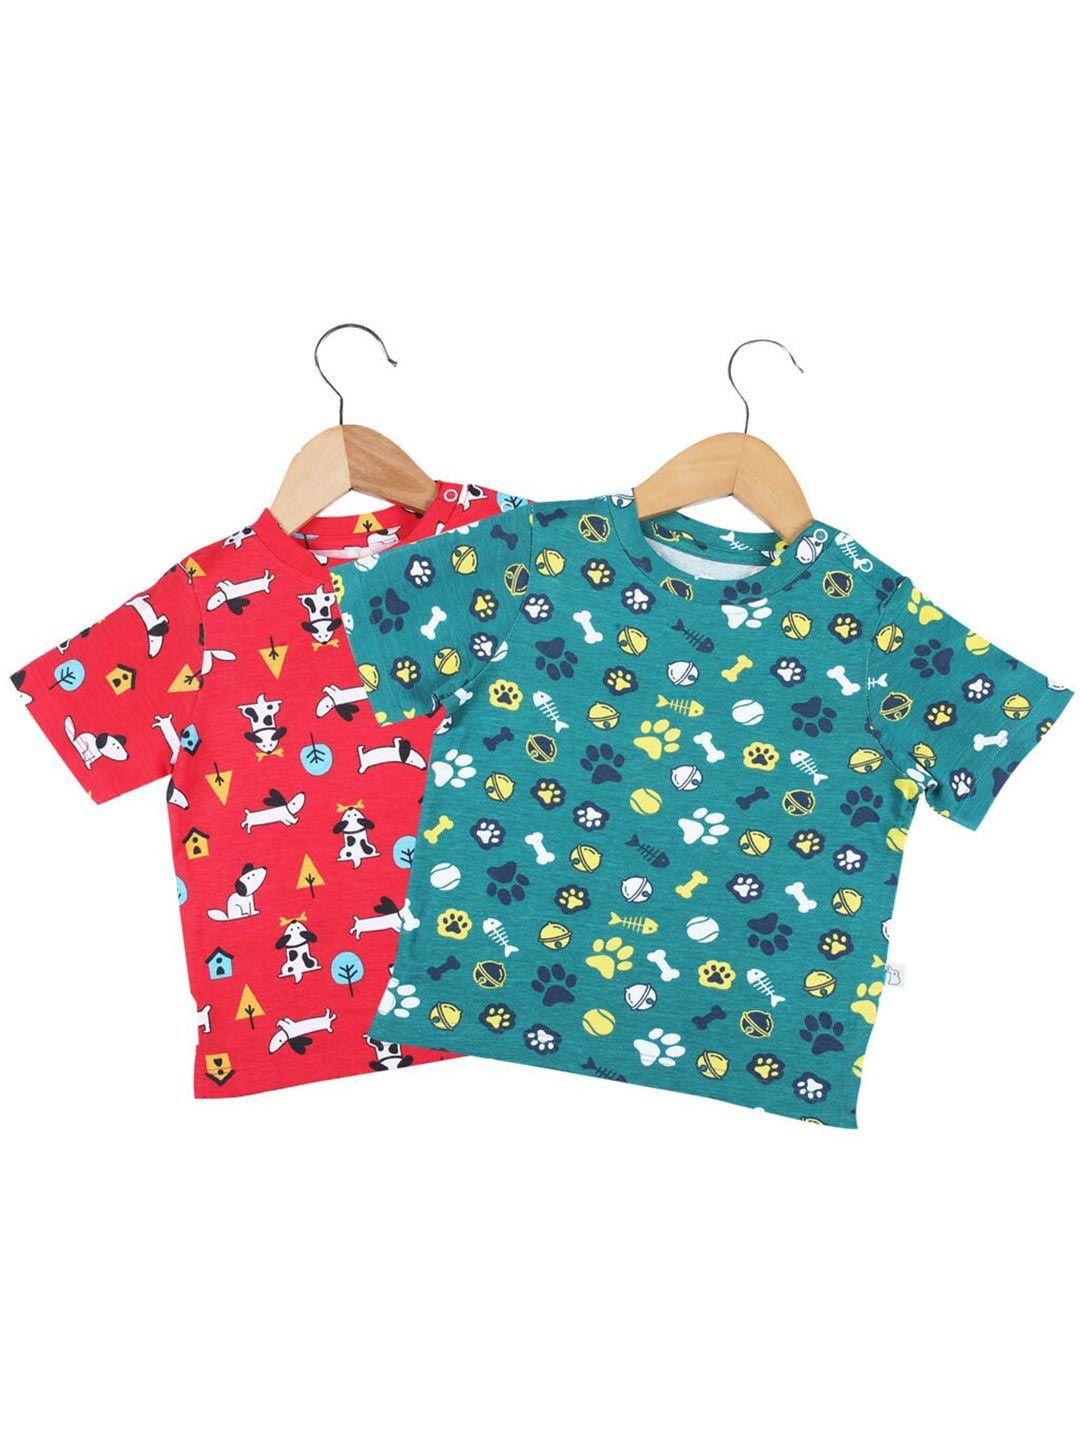 superbottoms-pack-of-2-kids-red-&-green-printed-sustainable-t-shirt